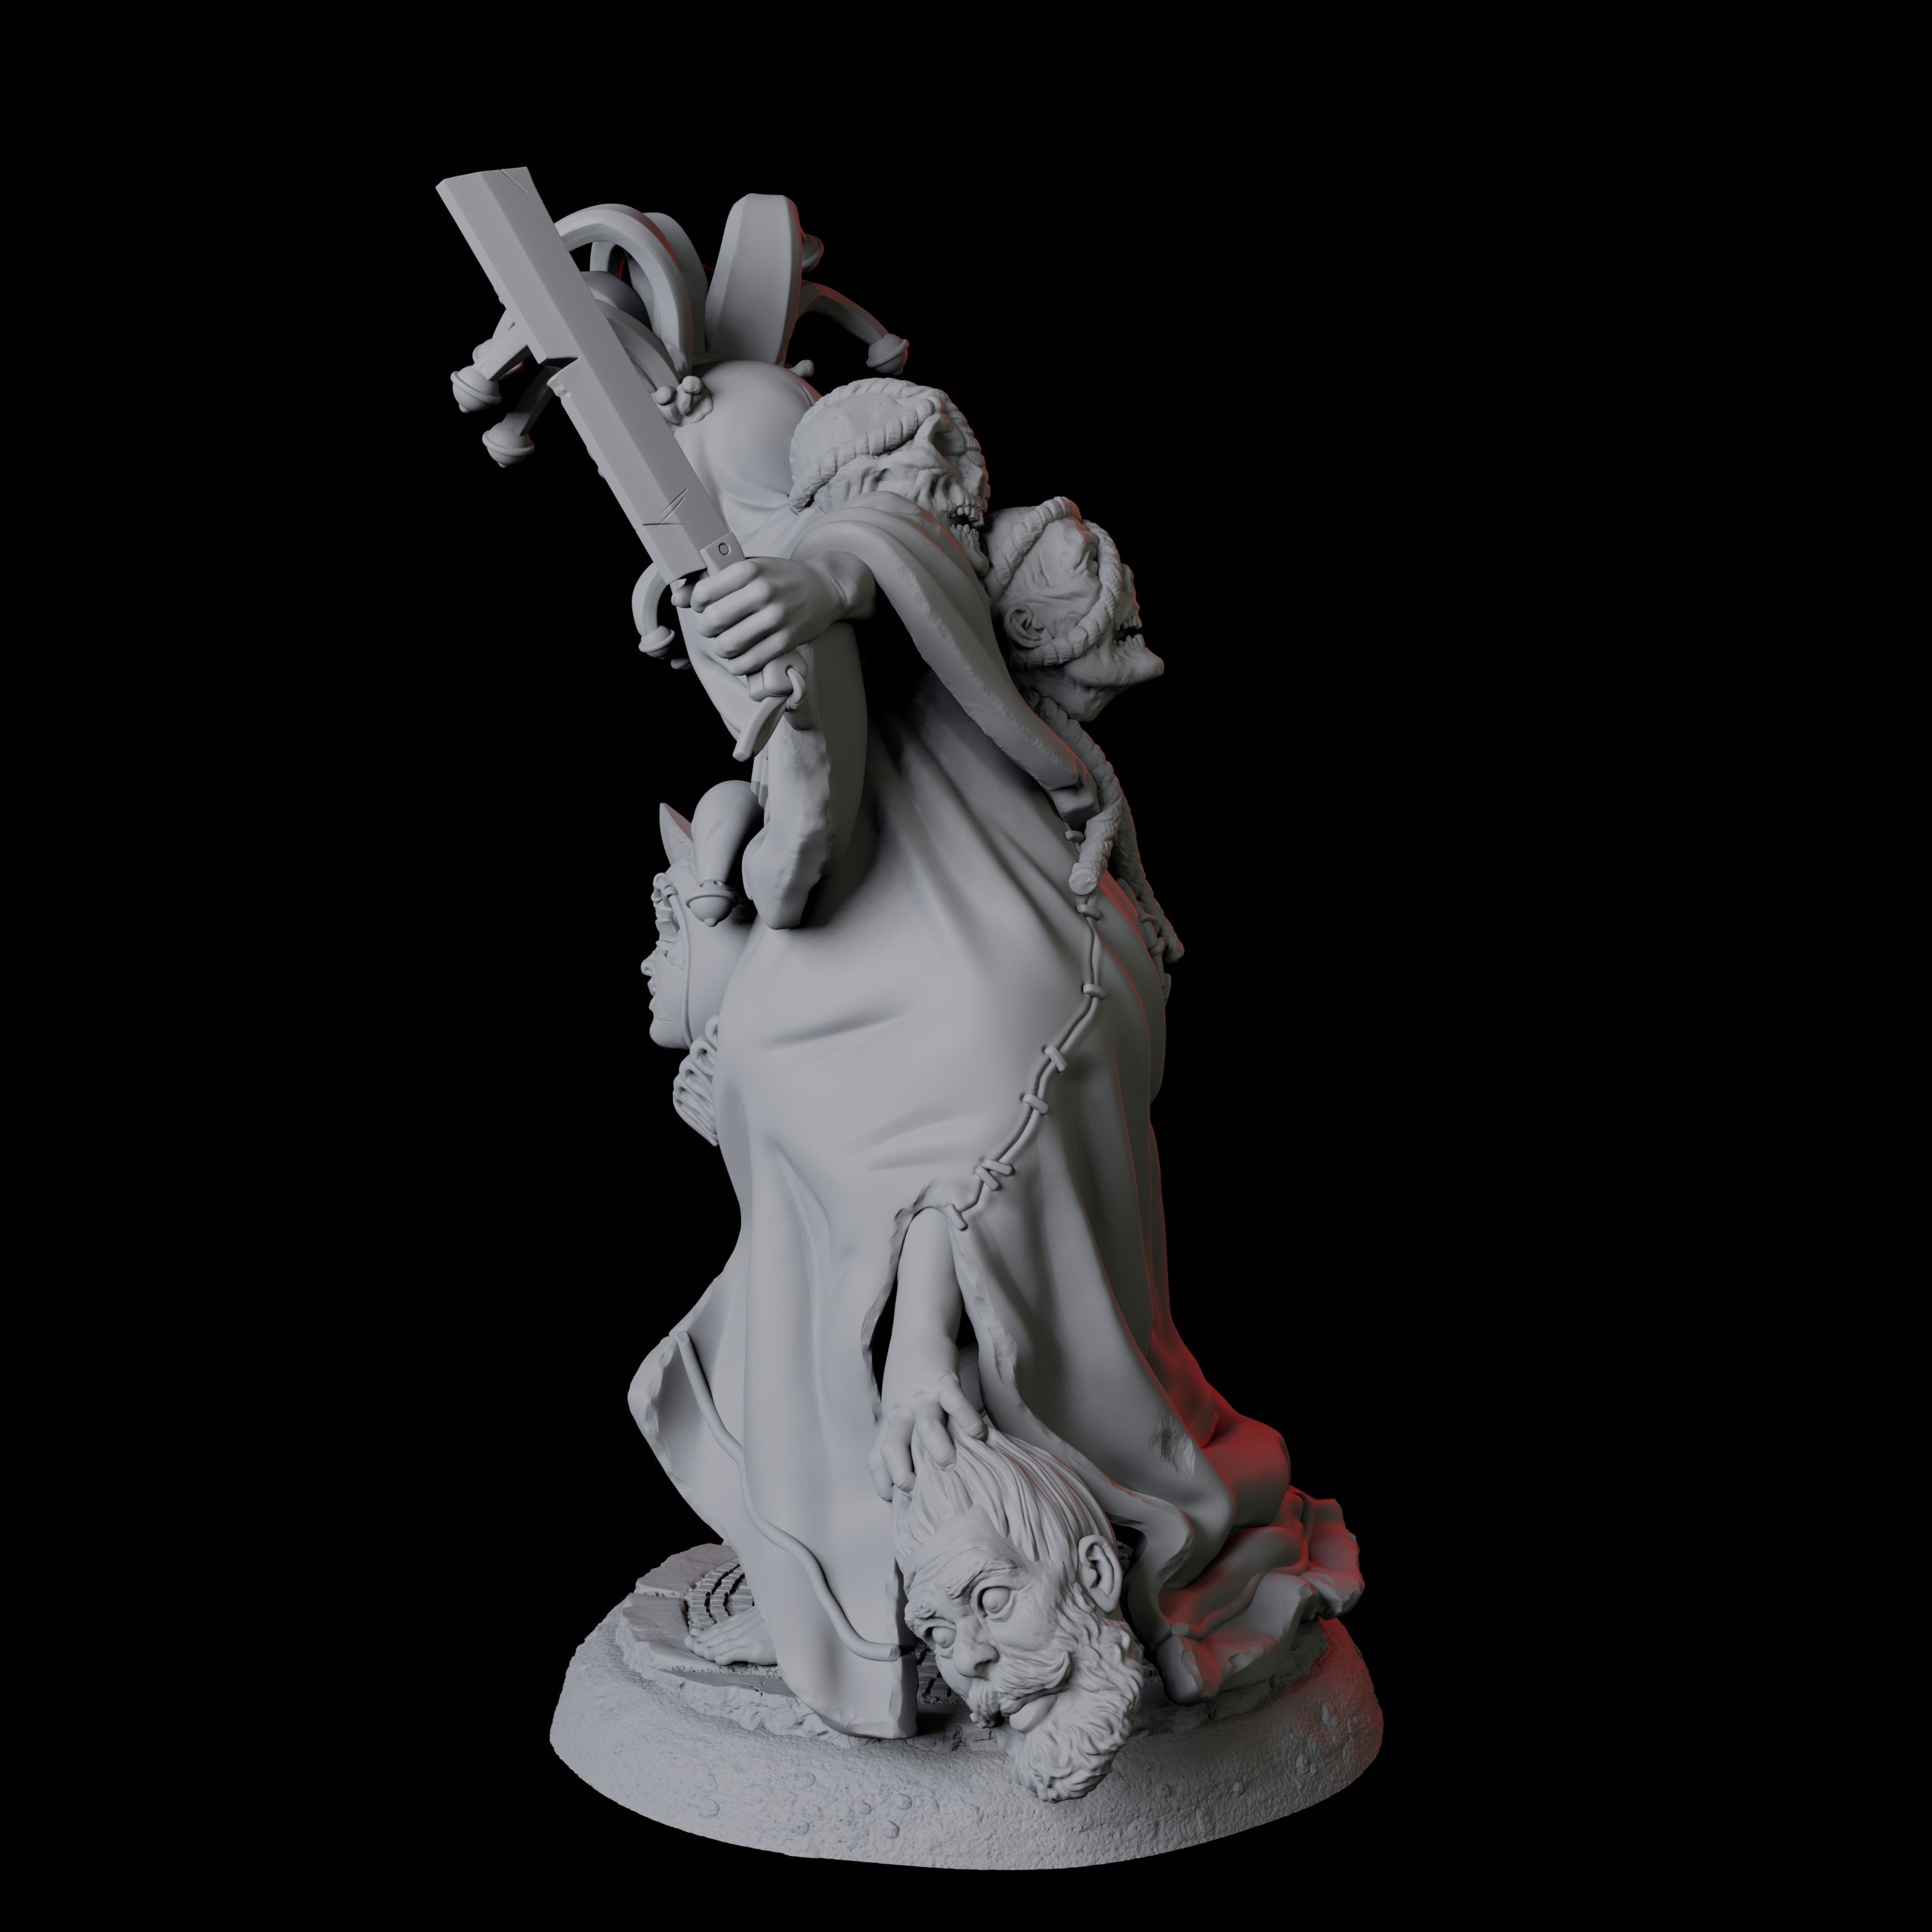 Weird Halfling Jester Pair B Miniature for Dungeons and Dragons, Pathfinder or other TTRPGs